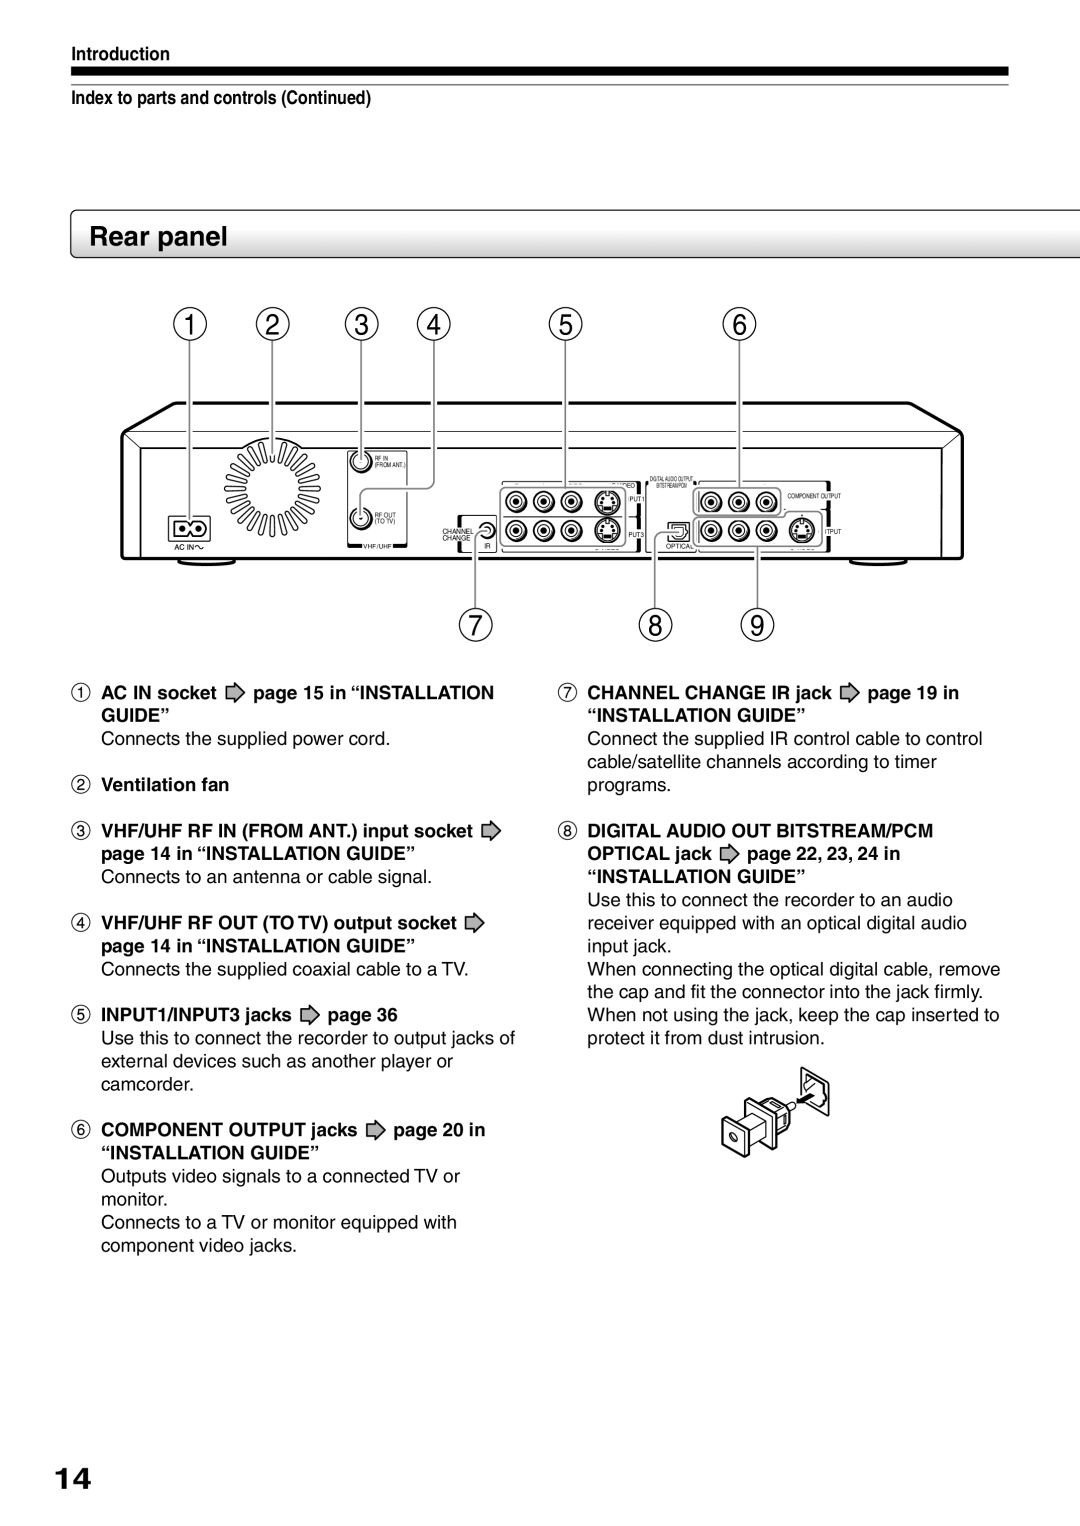 Toshiba D-KR2SU Rear panel, Introduction Index to parts and controls Continued, Ventilation fan, INPUT1/INPUT3 jacks page 